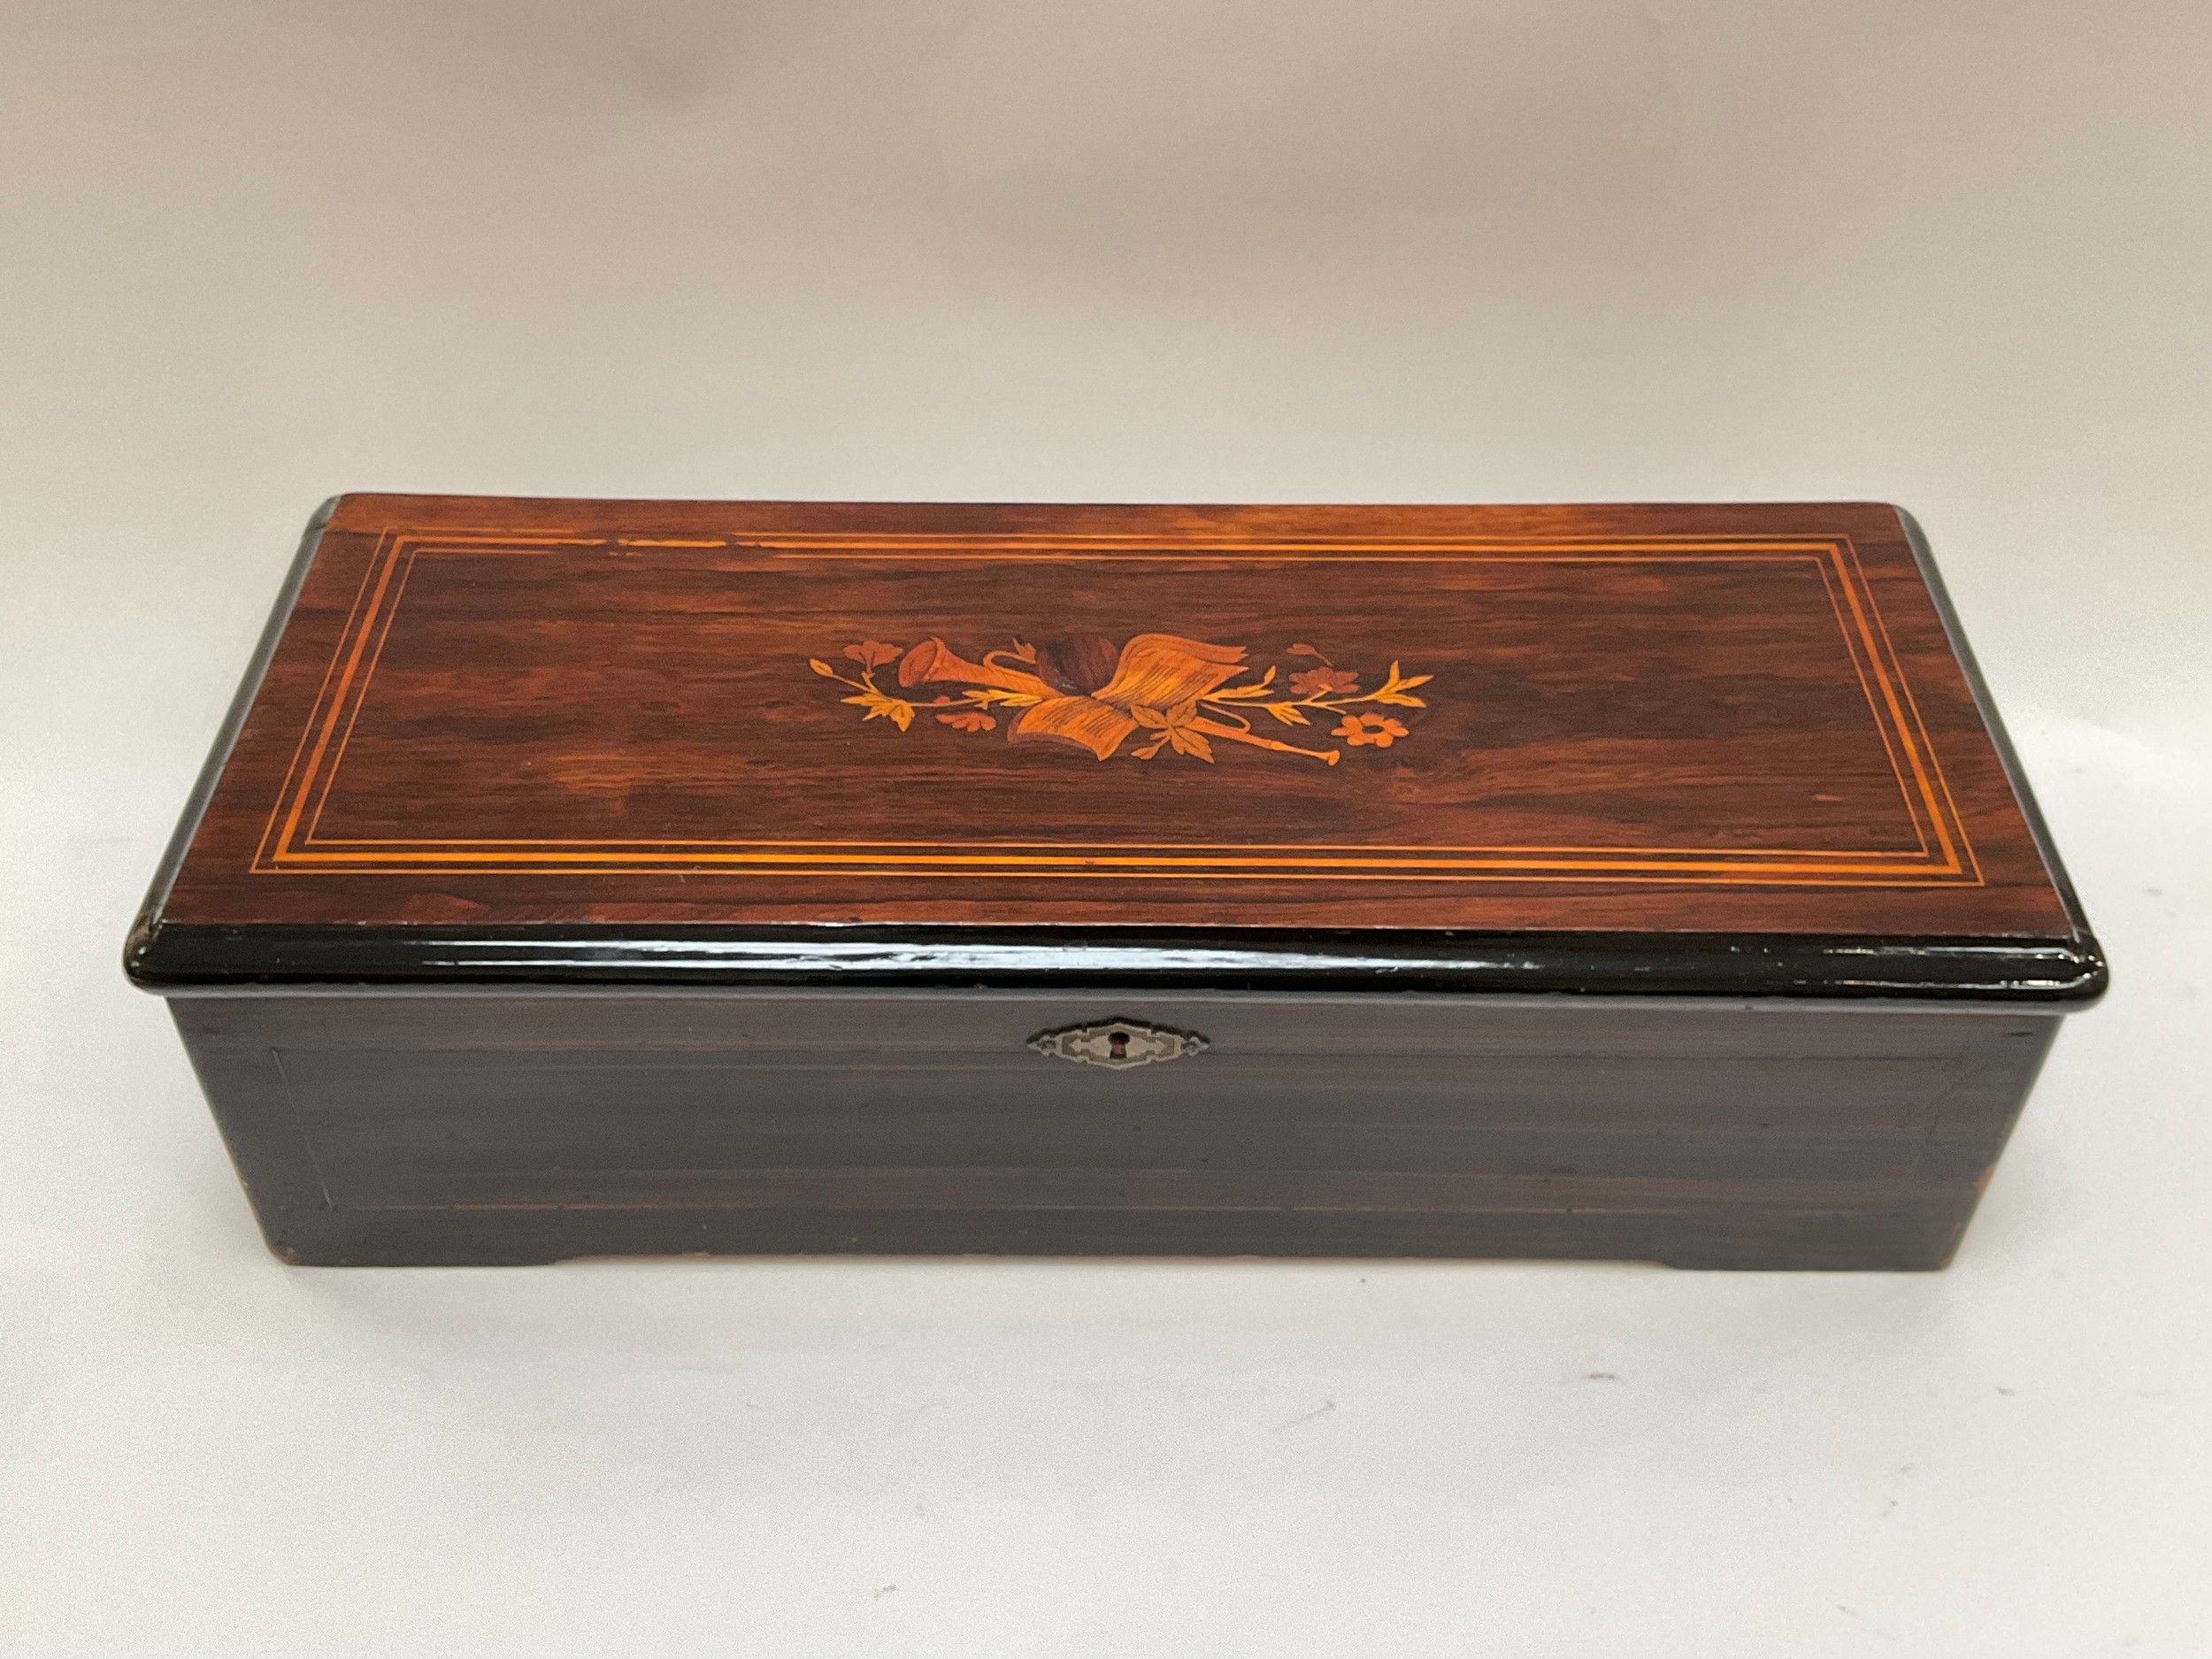 Large table-top musical box, late 19th/early 20th Century, lacquered wooden case, lid with